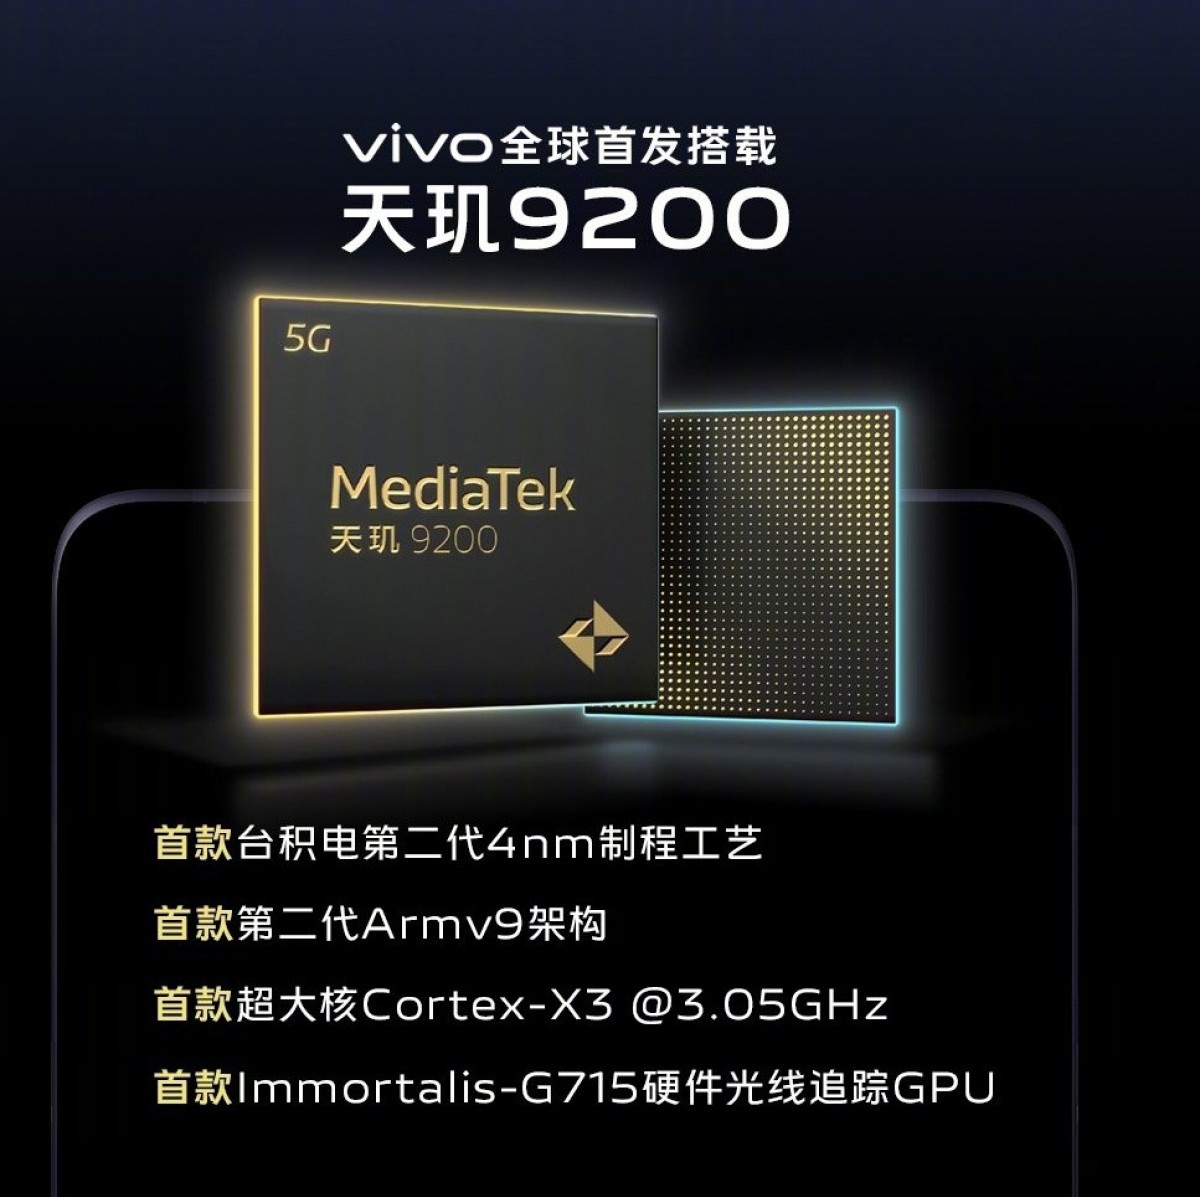 vivo V2 ISP is announced with faster processing, better low lighting optimization